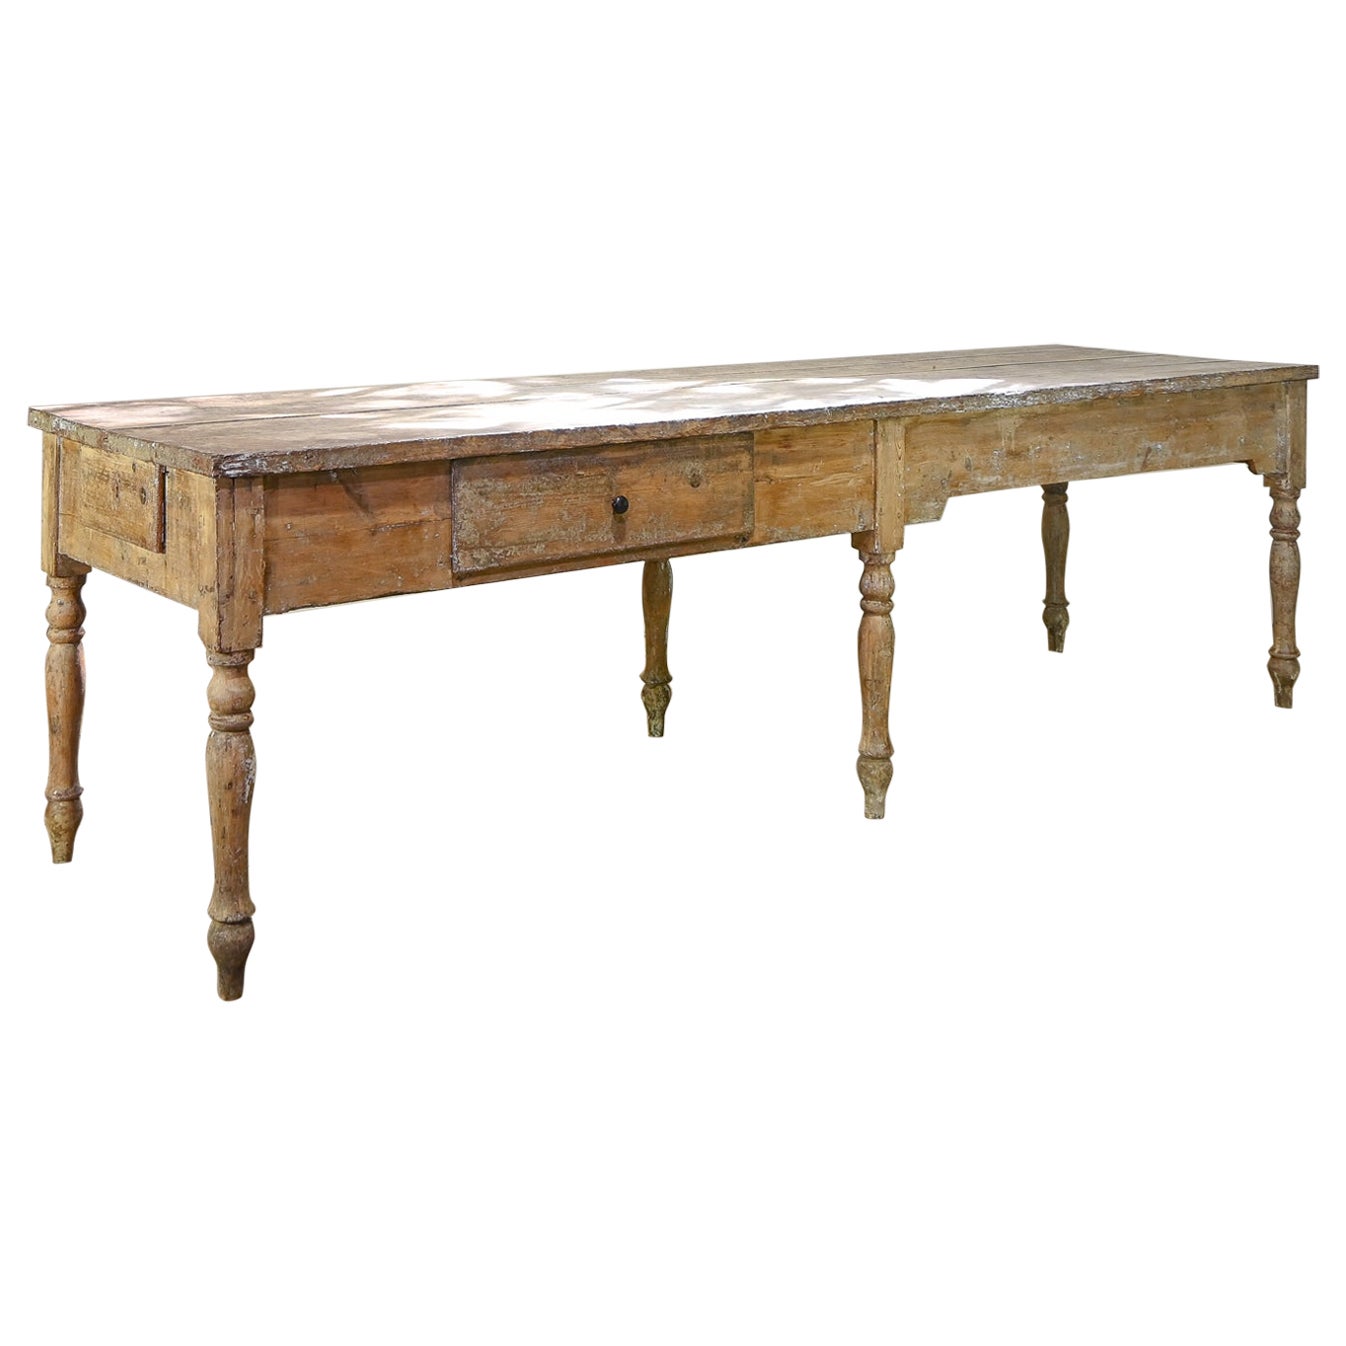 A Large 18th Century French Painted Farmhouse Dining Table For Sale